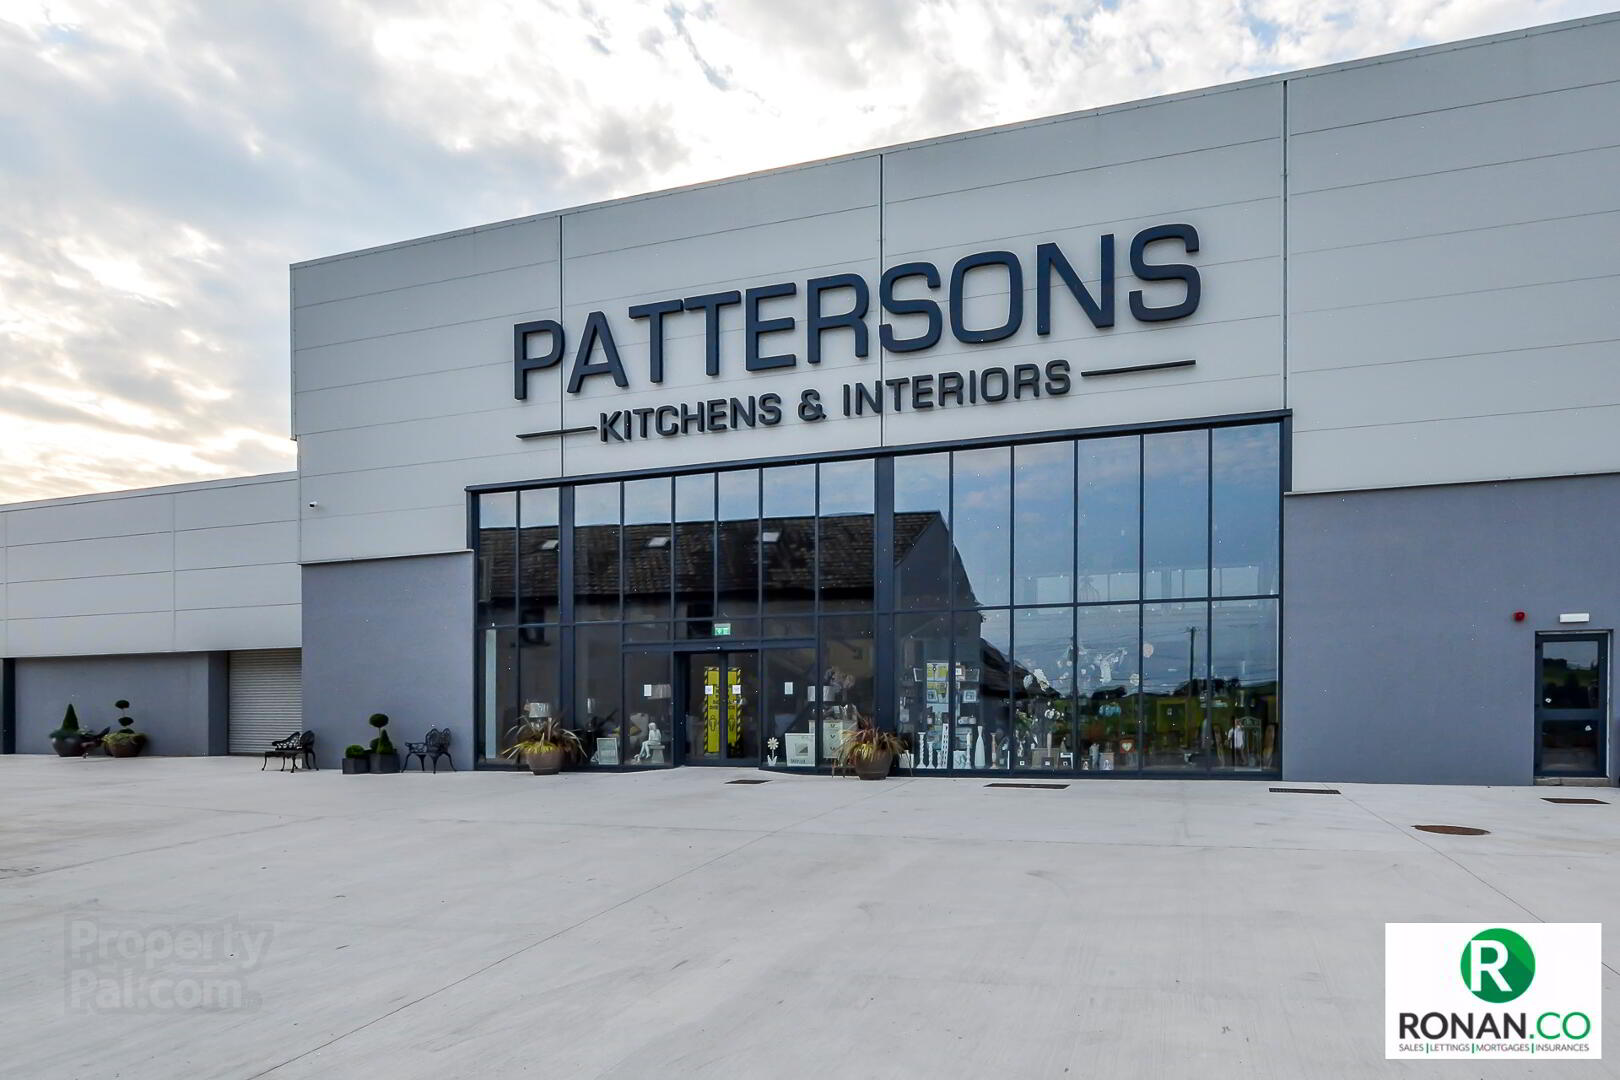 Pattersons Kitchens & Interiors Complex, The Haw